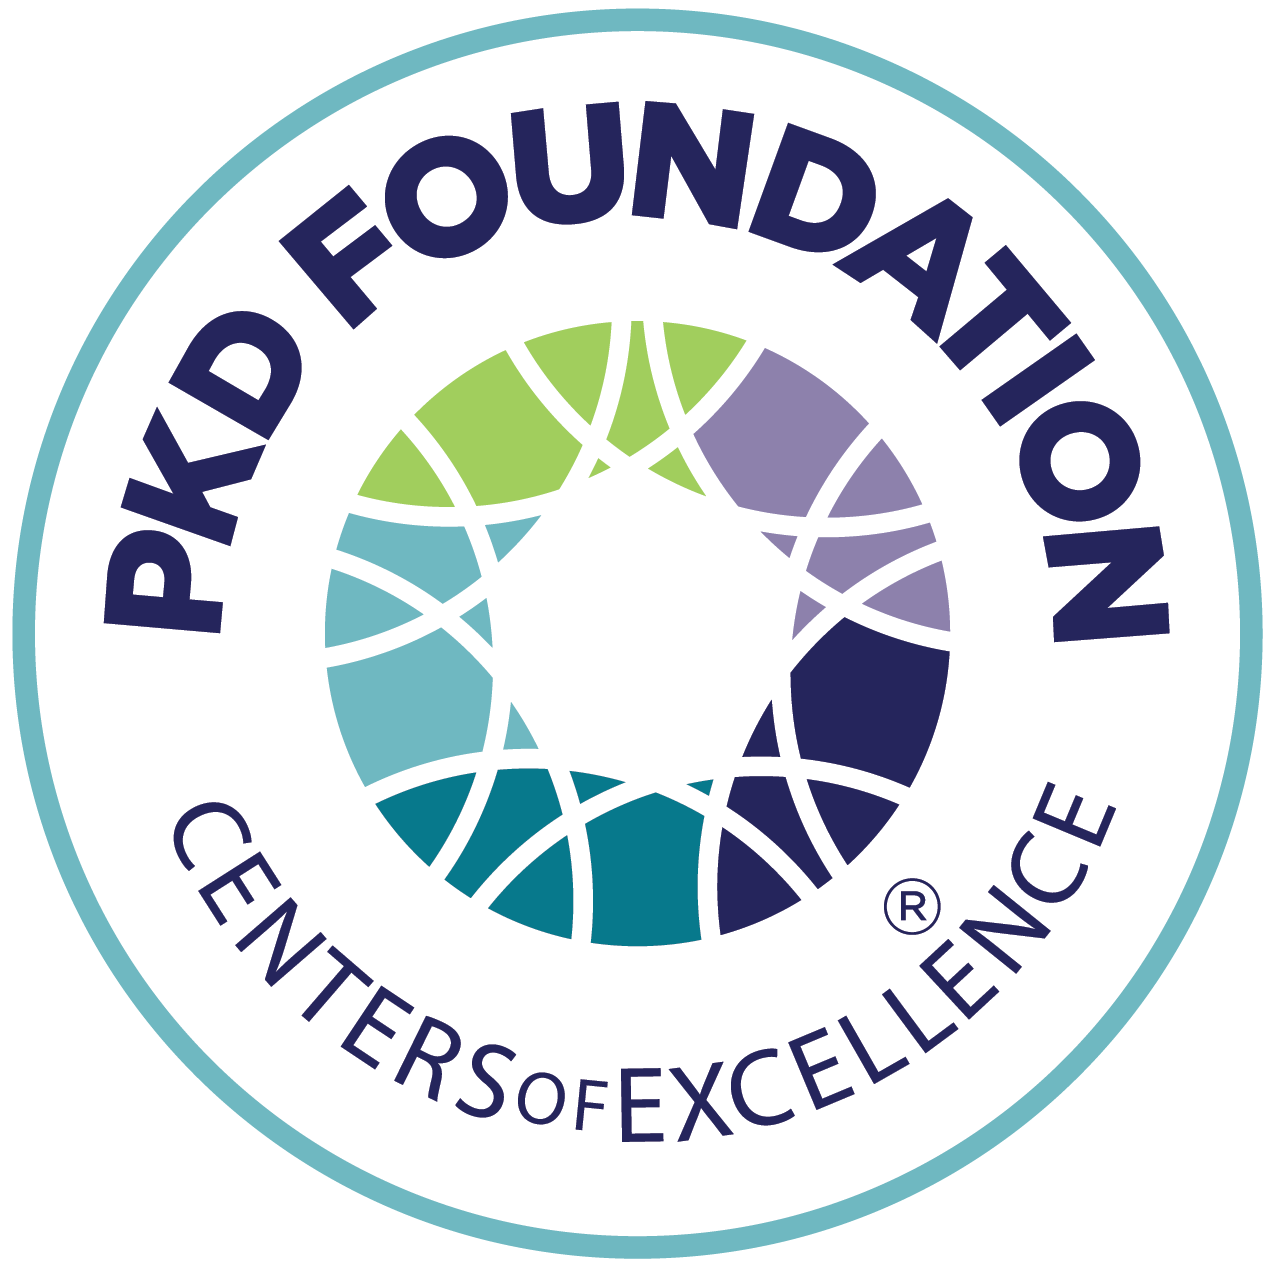 The PKD Foundation Centers of Excellence logo